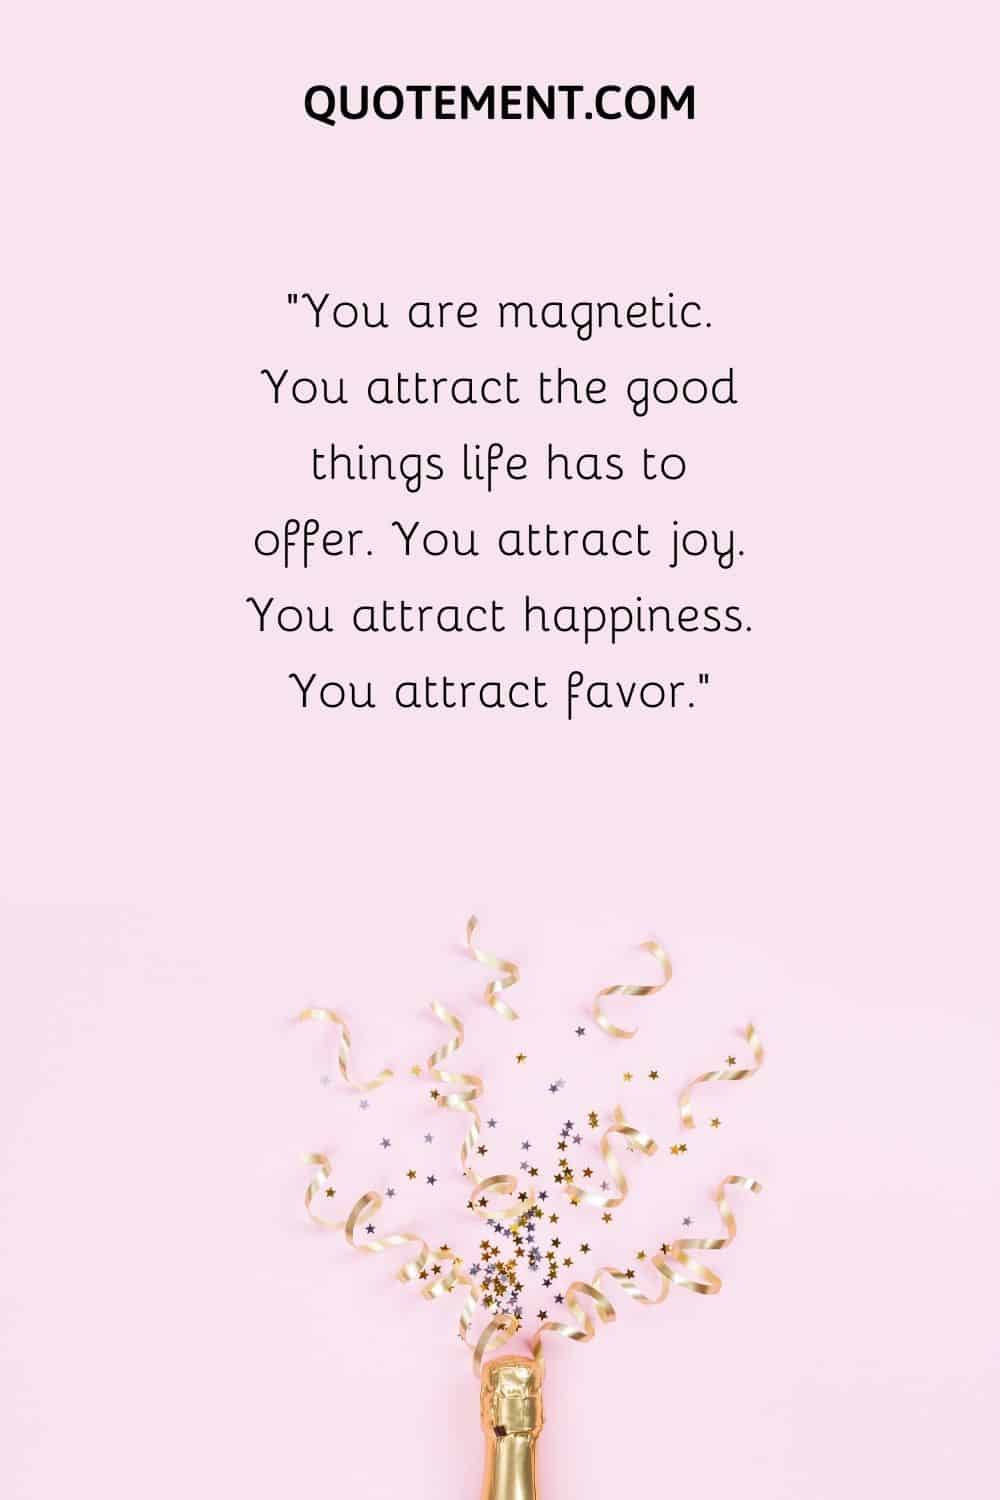 You are magnetic. You attract the good things life has to offer. You attract joy. You attract happiness. You attract favor.